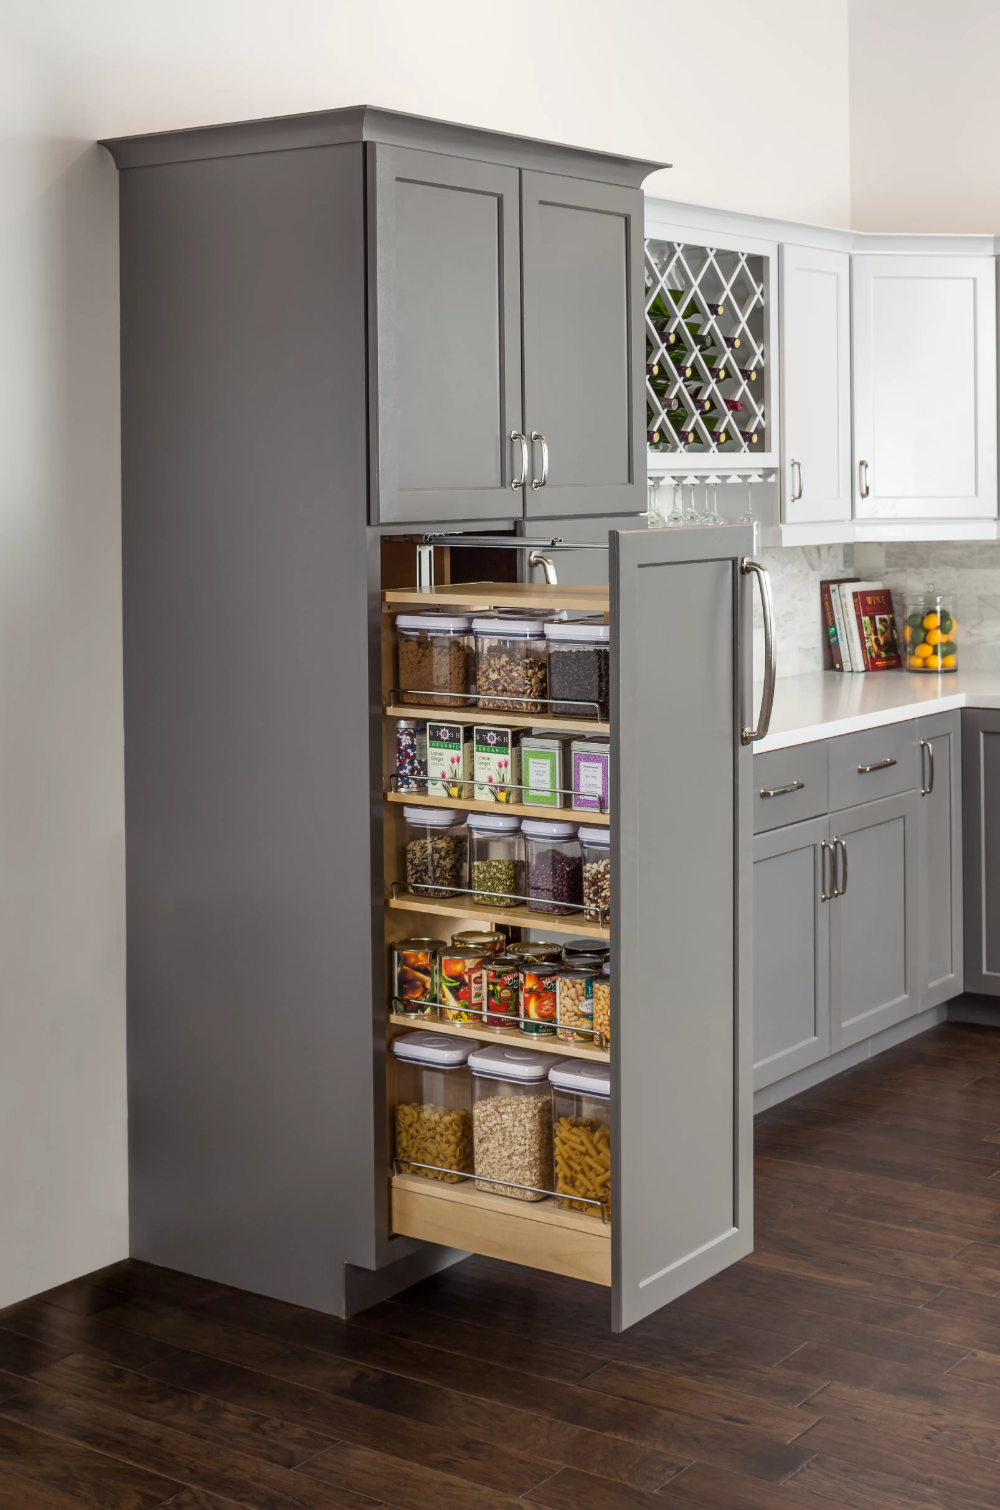 Wood Cabinet Pull Out Pantry - Wood Cabinet Pull Out Pantry -   17 diy Wood cabinet ideas